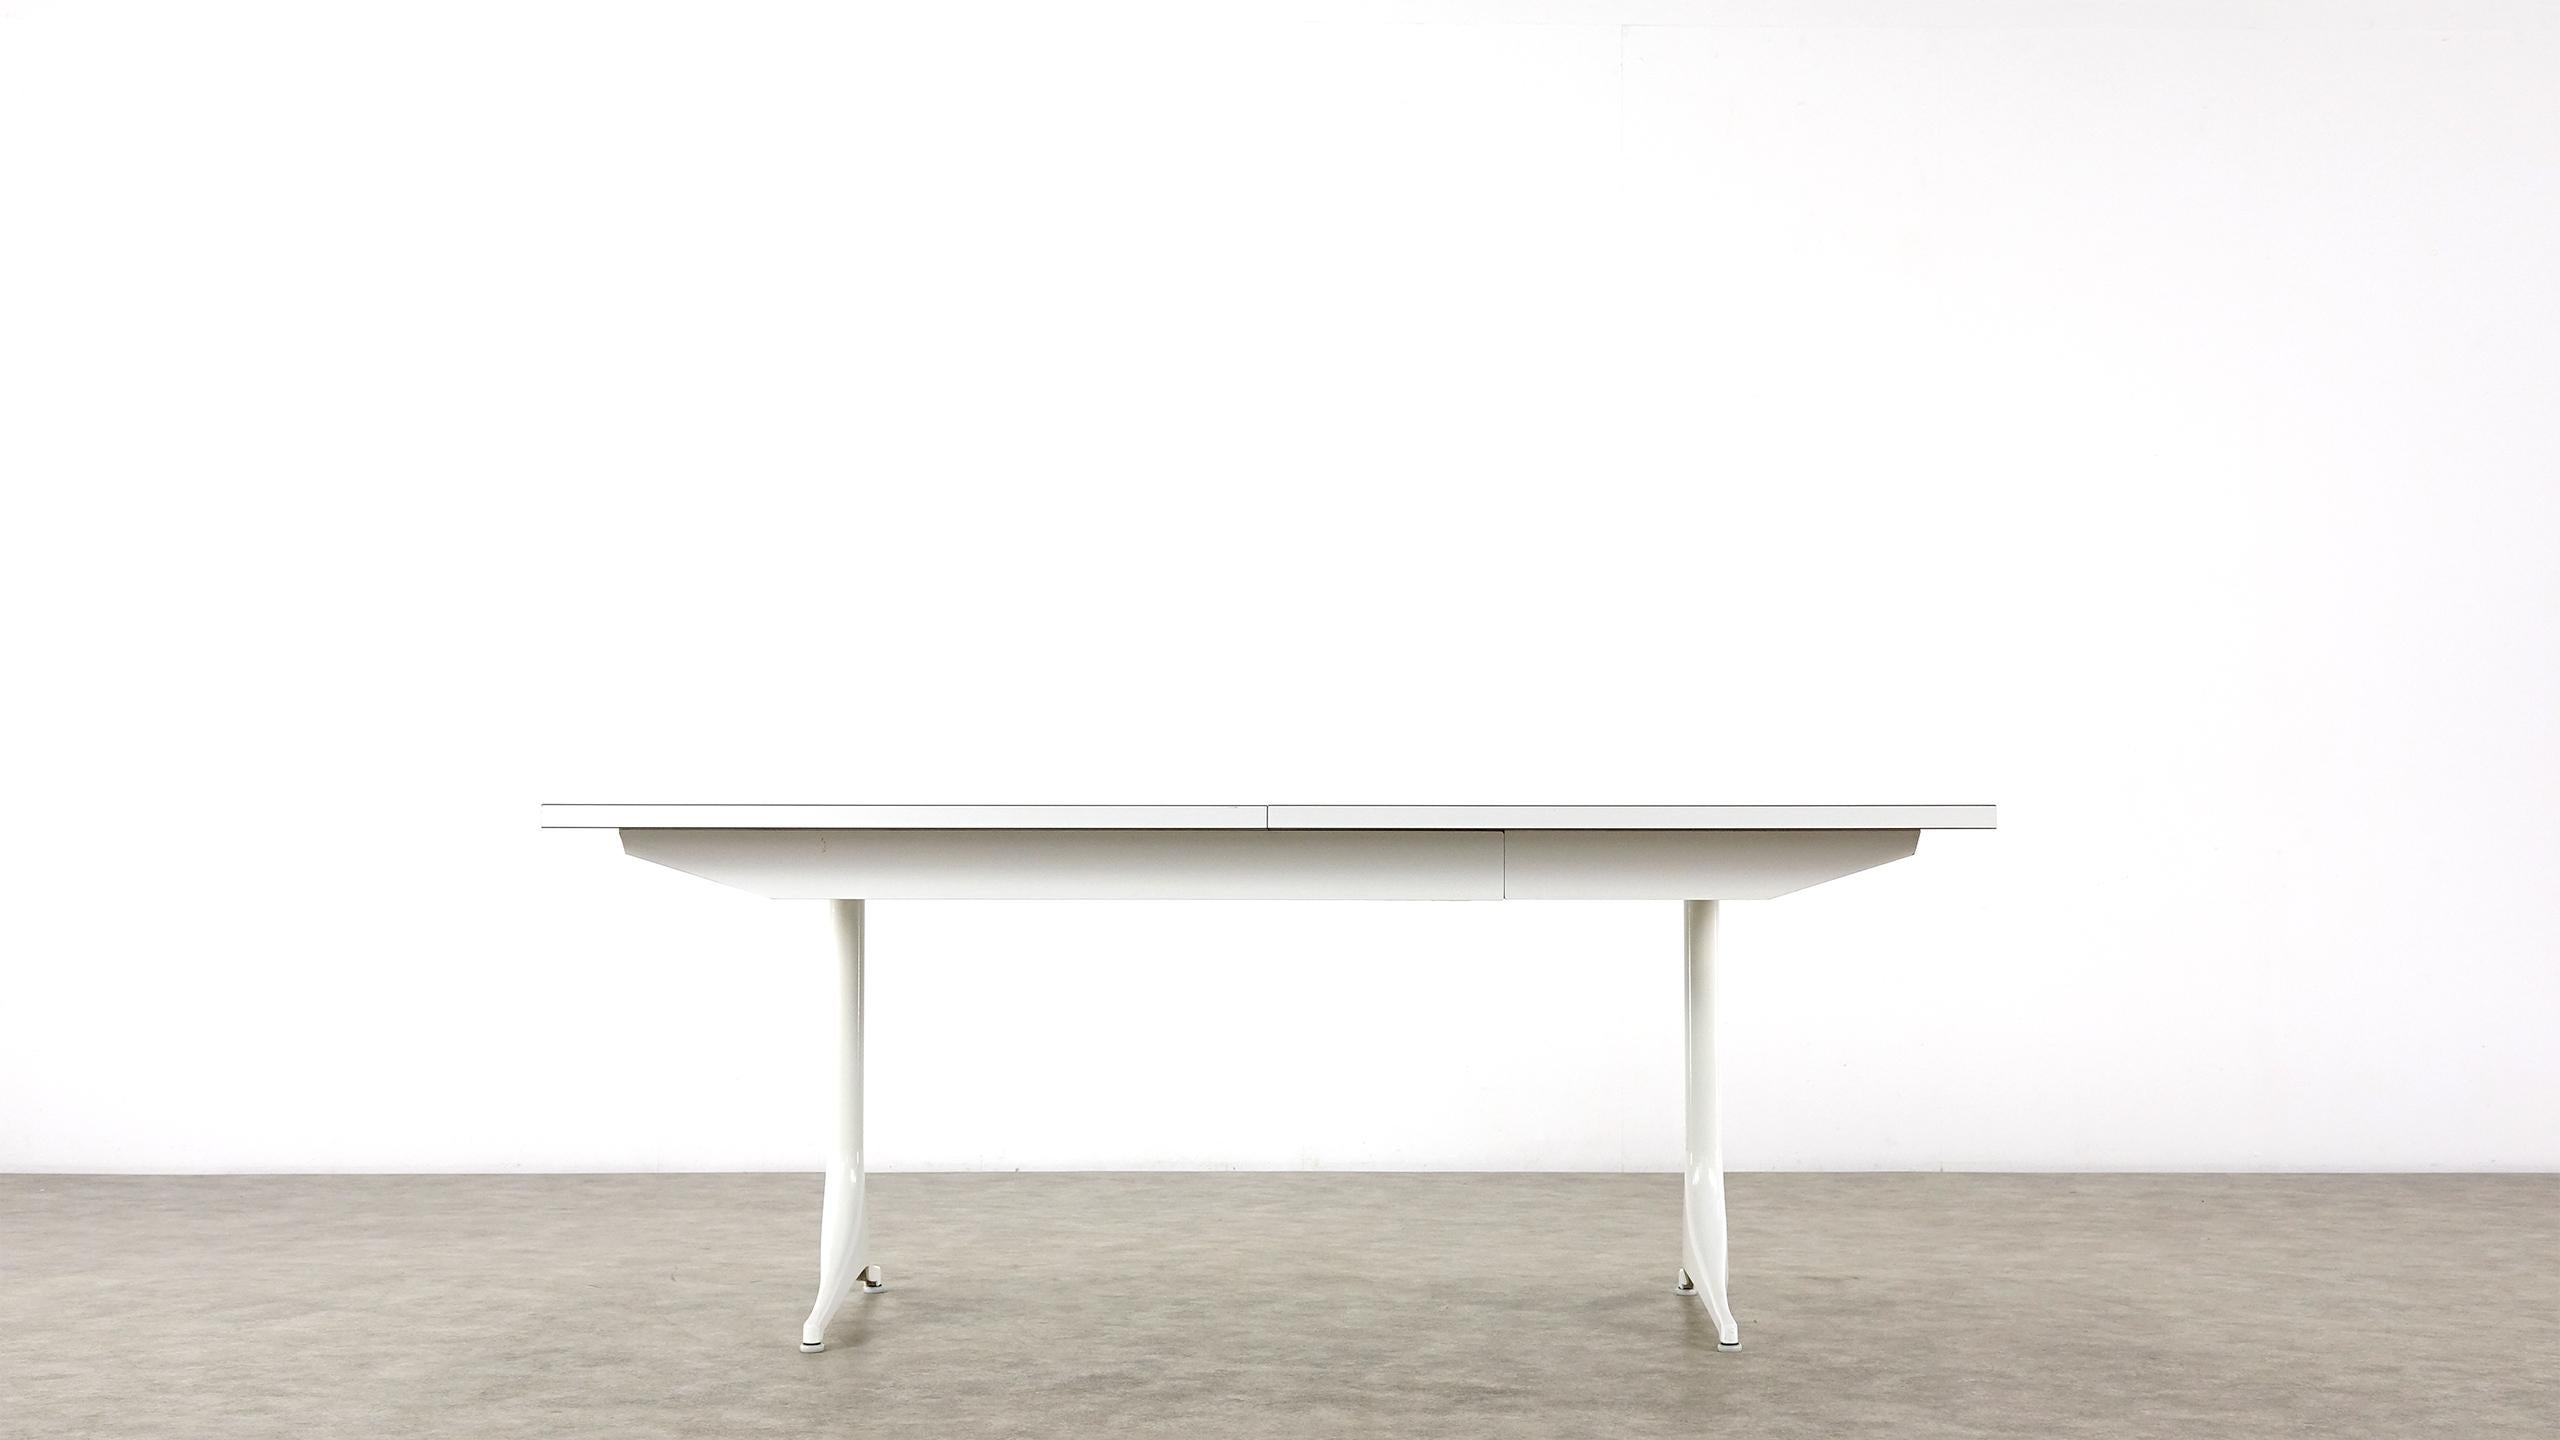 The table is extendable to 235 and 286.5 cm in width. In a good original vintage condition, preserving a patina.

A dining table designed by George Nelson, manufactured by Herman Miller in the USA, circa 1960. The table is made from white coated